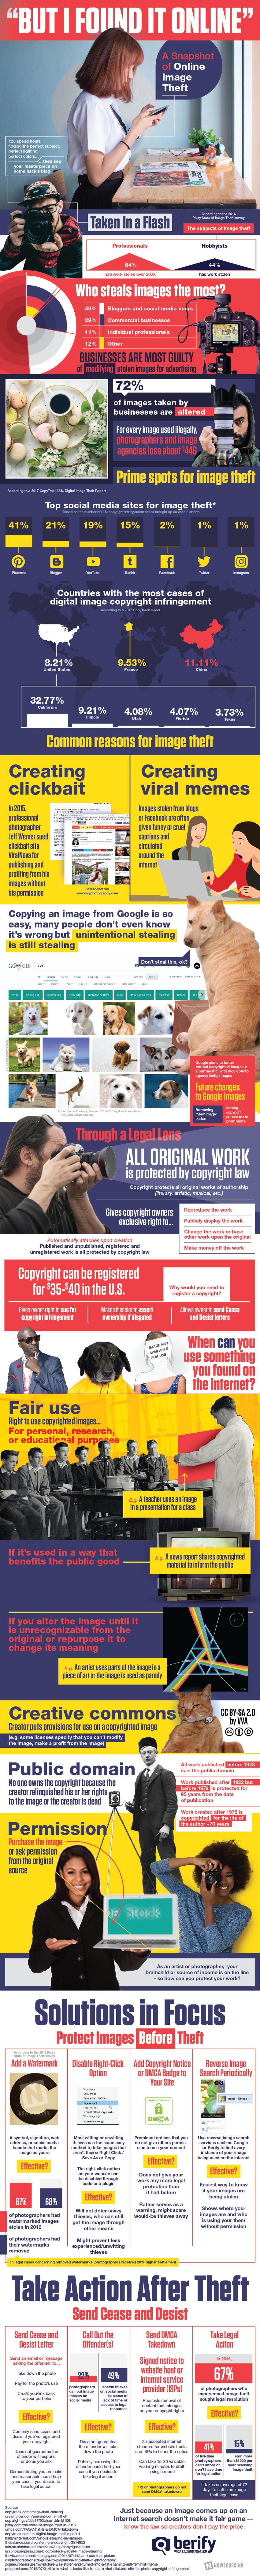 Are You Guilty of Stealing Images? How to Avoid Breaking Copyright Law